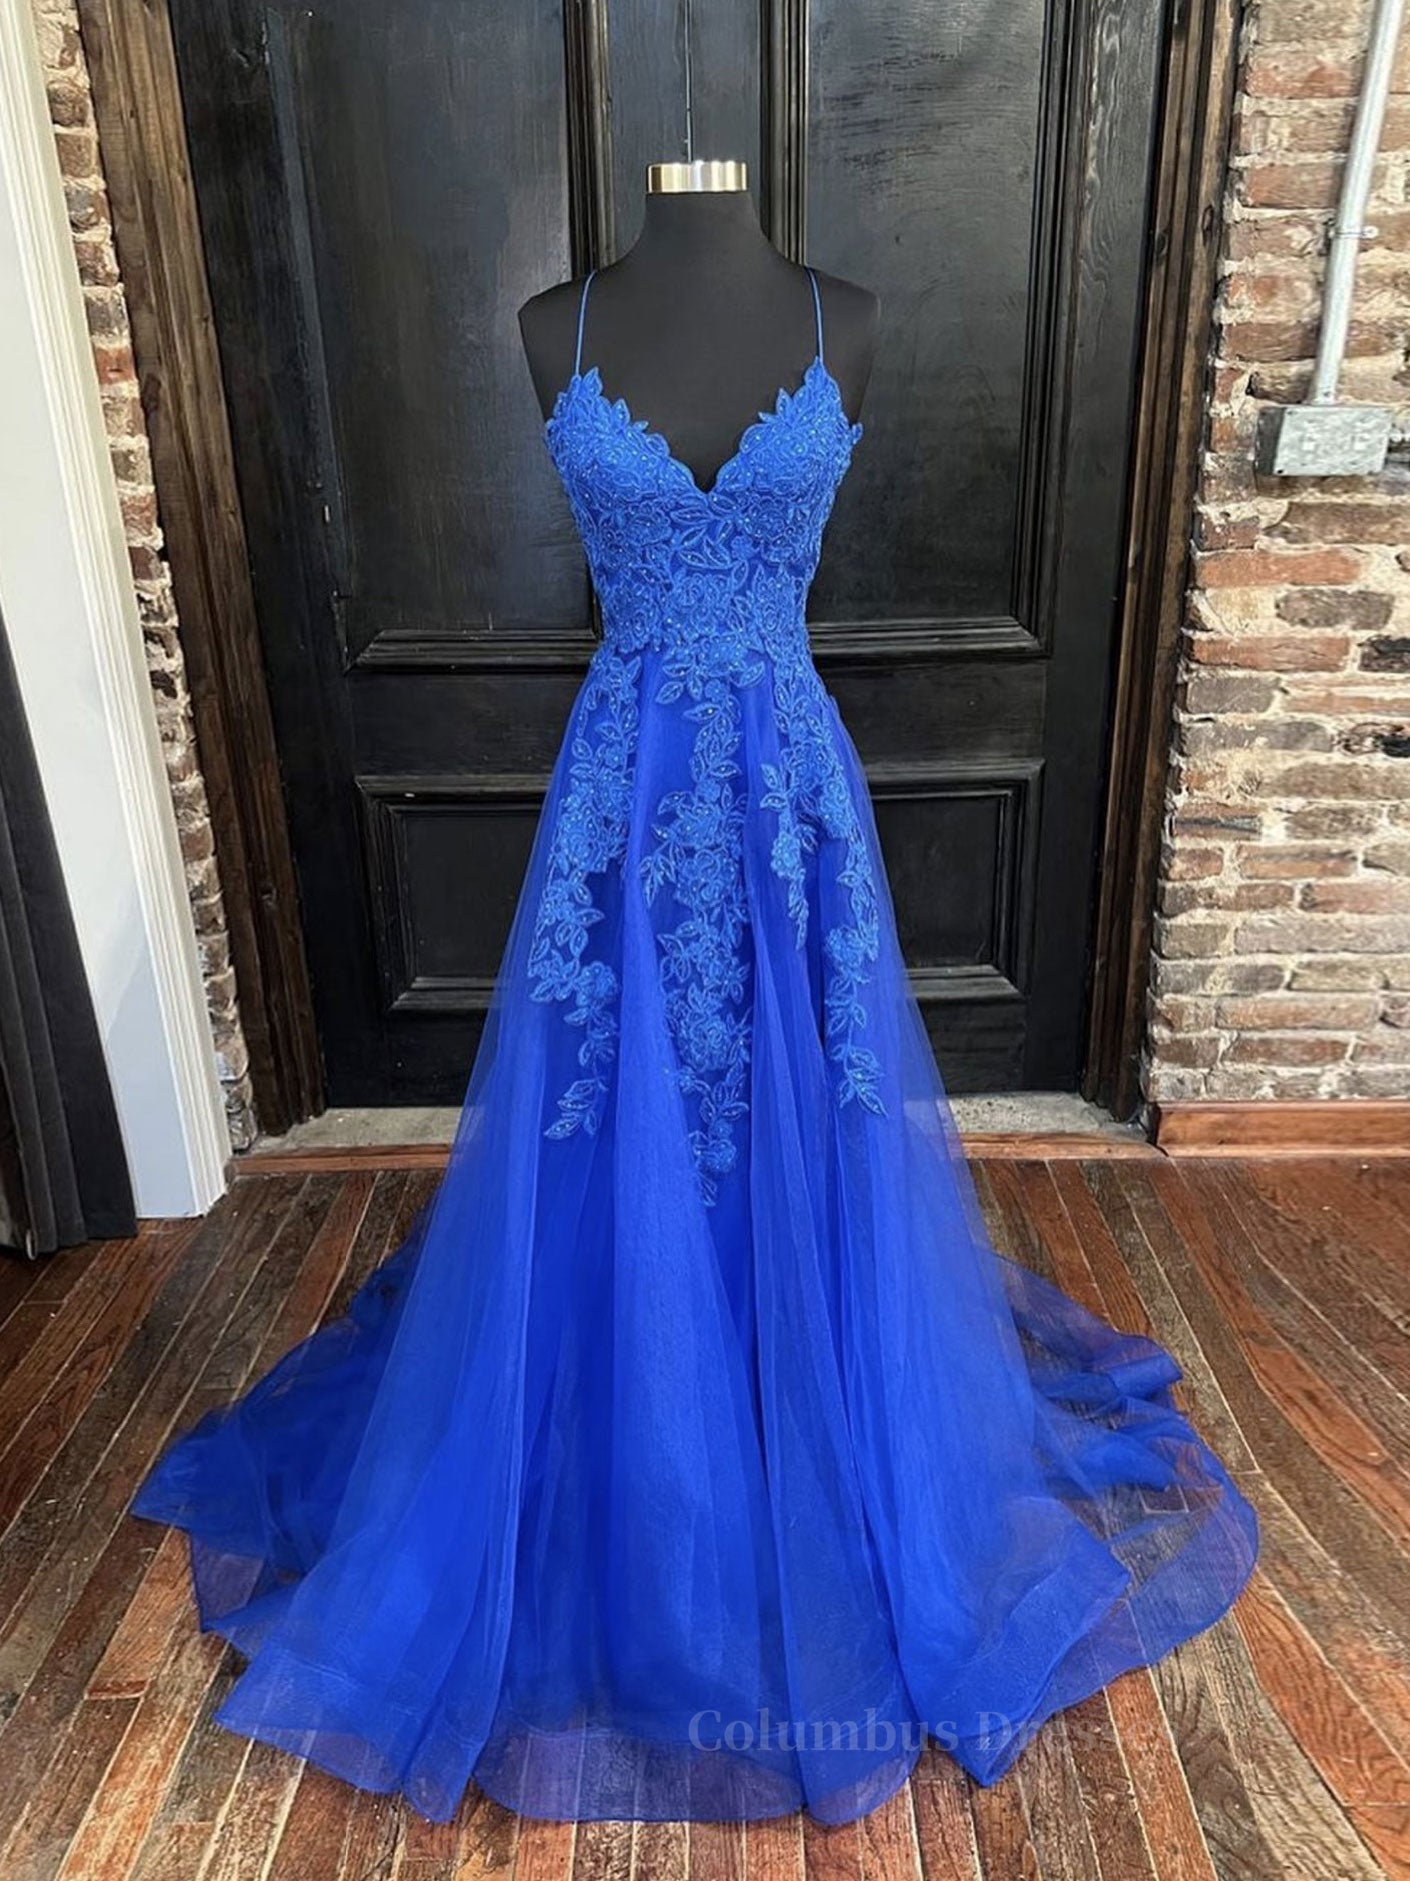 Party Dress Style, Blue v neck tulle lace long prom dress, blue lace bridesmaid dress